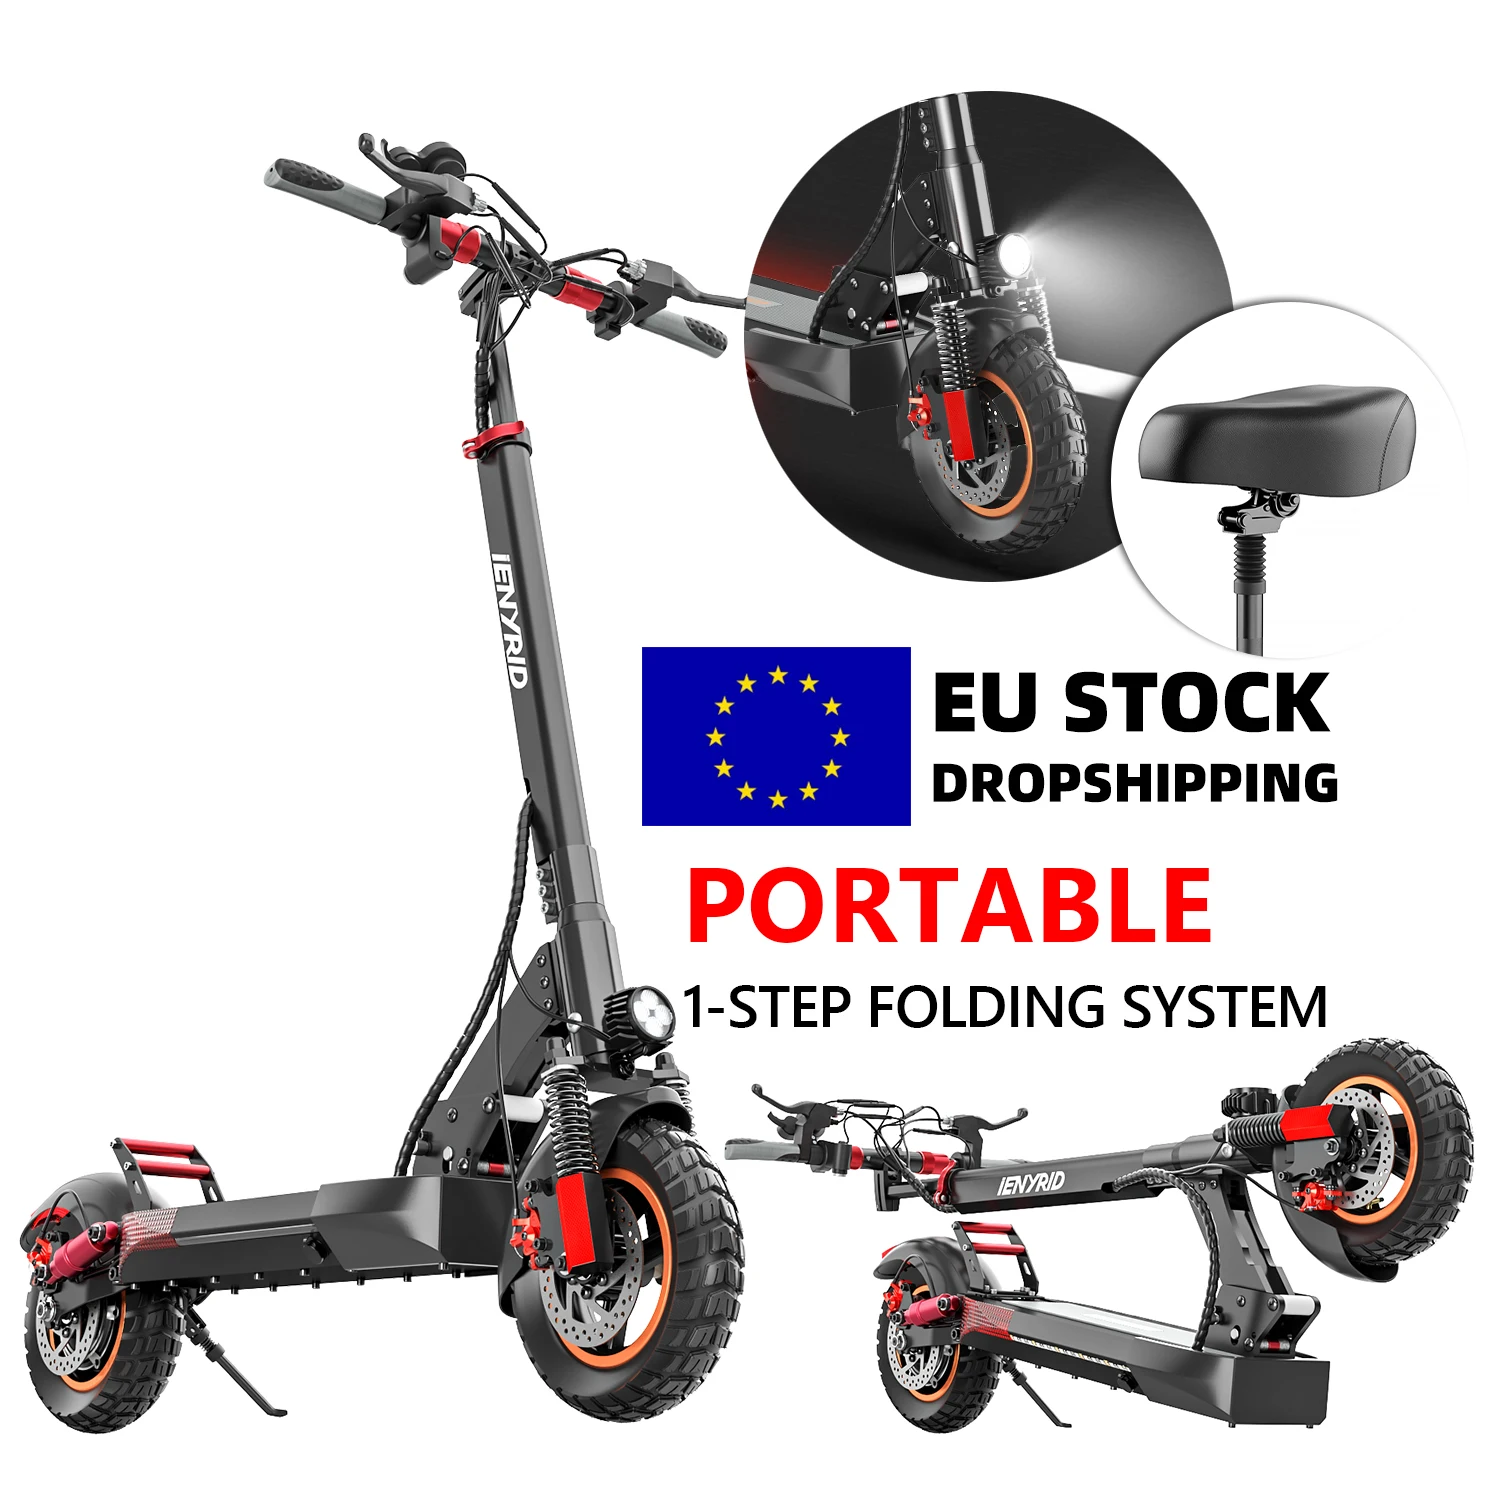 

Europe UK USA Warehouse iE M4 PRO S 10ah 16ah 500W Motor electric off road scooter 35Km Max distance long range electric scooter